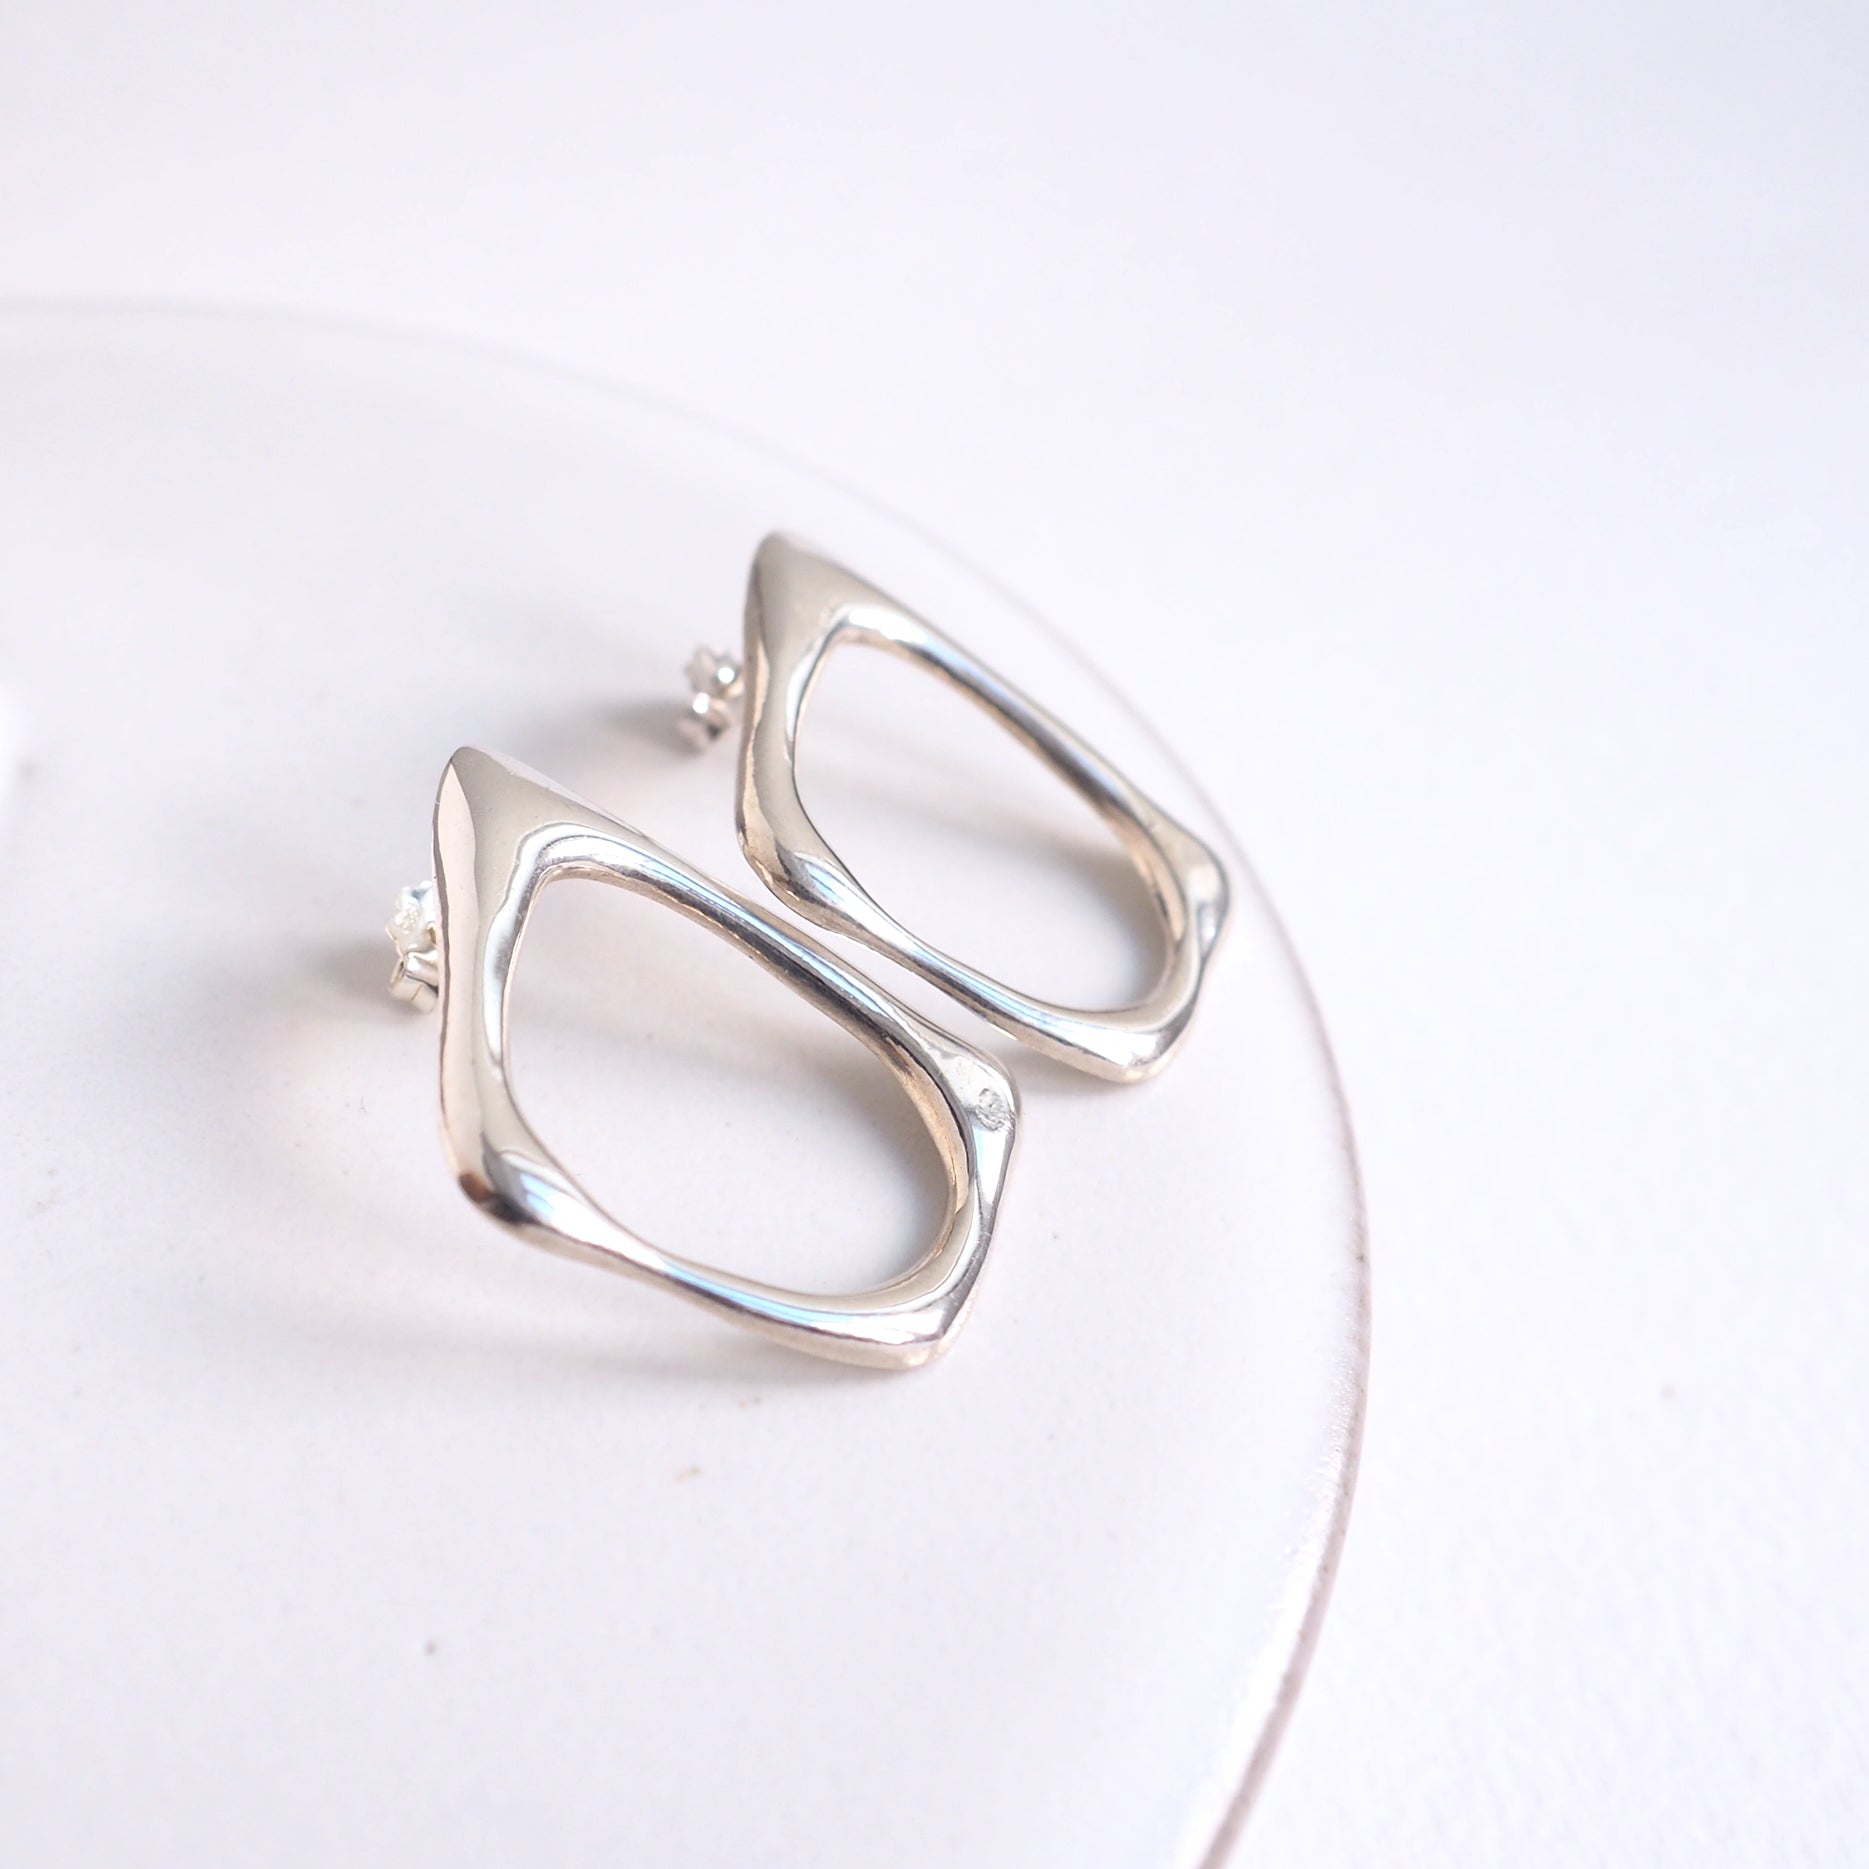 TRiangle Earrings silver gold jewelry handcrafted handmade design custom unique bespoke 